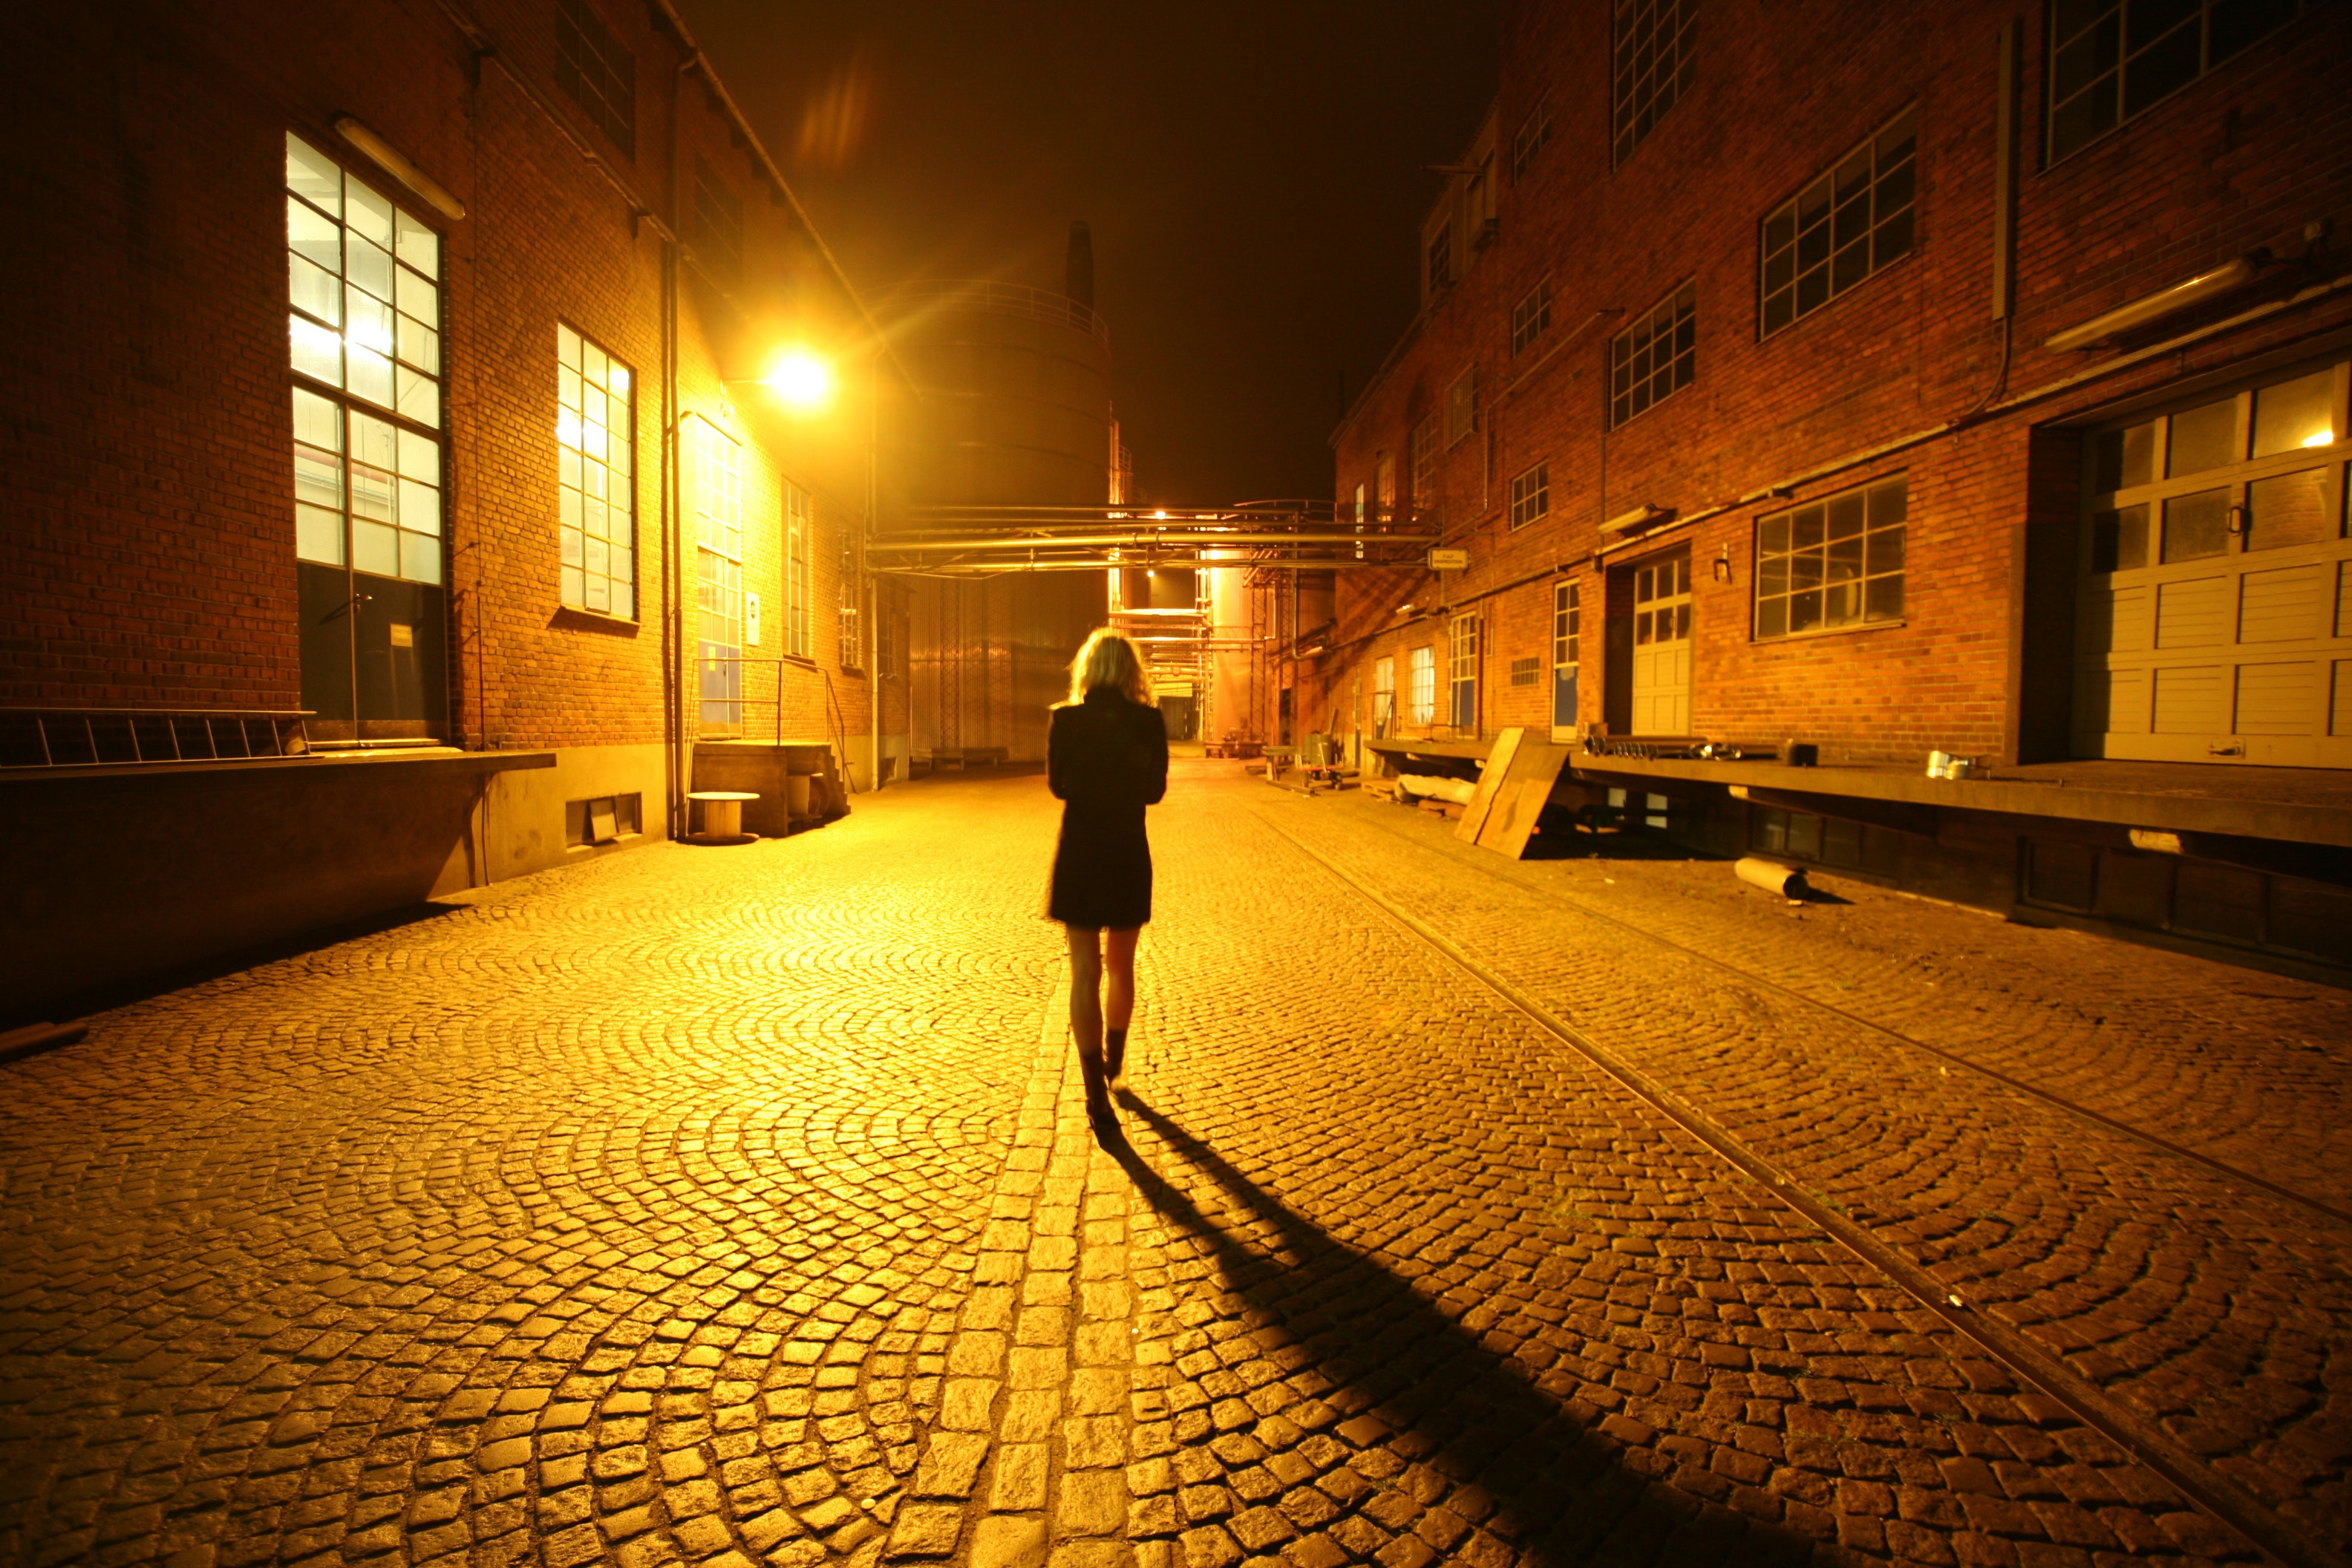 Photo of https://visionarysociety.org/images/topic/images/Woman_walking_on_street_at_night.jpg